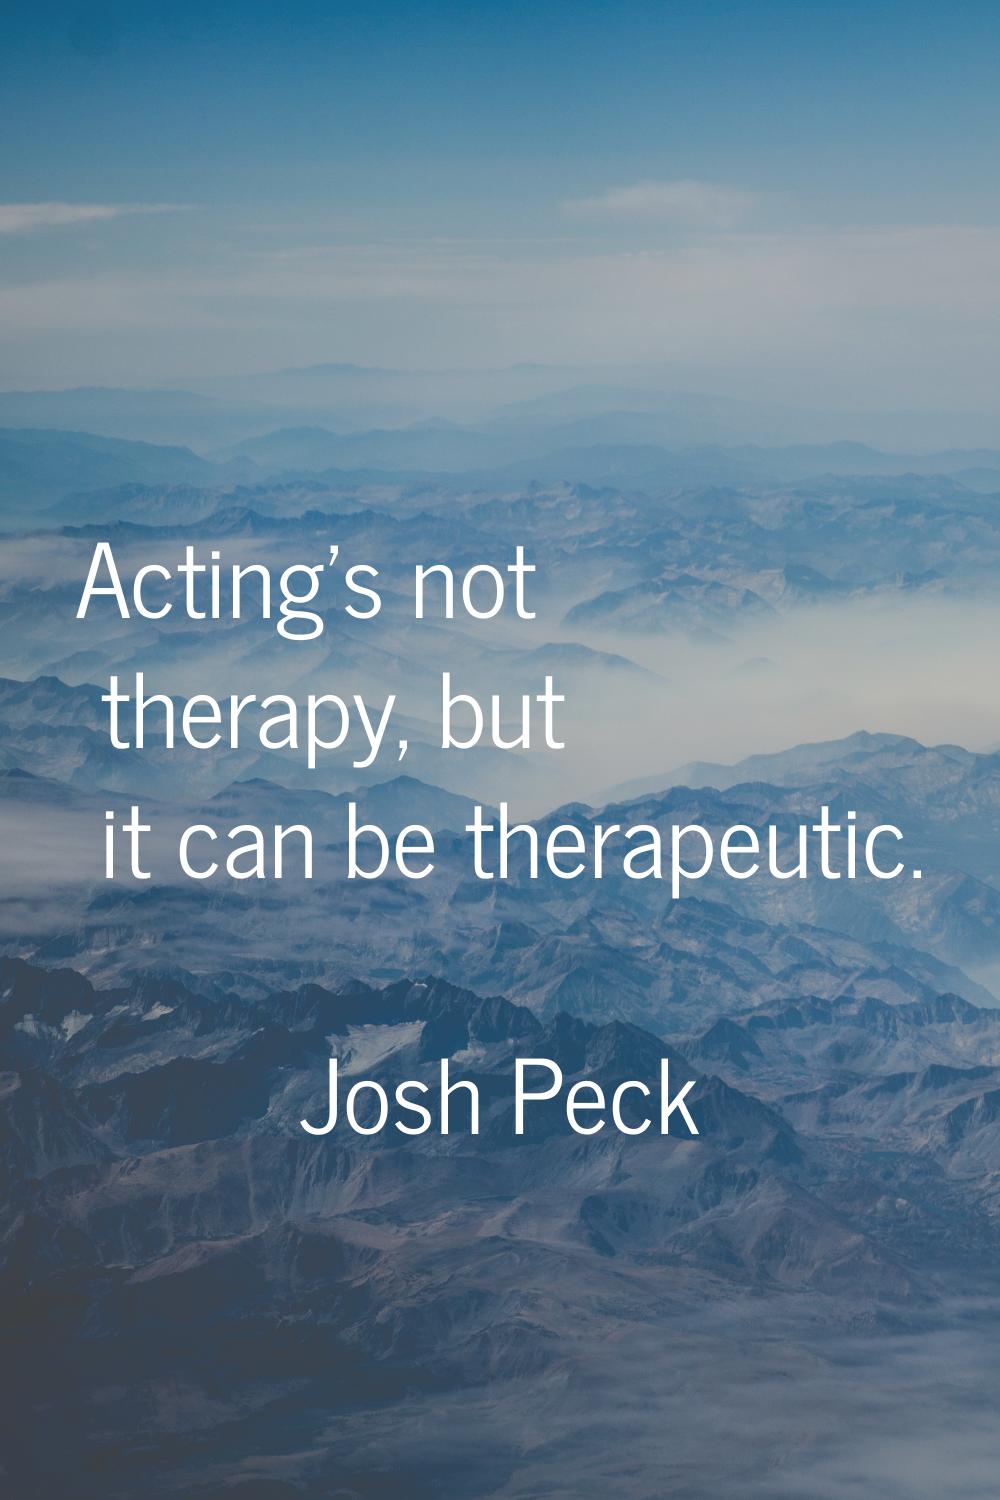 Acting's not therapy, but it can be therapeutic.